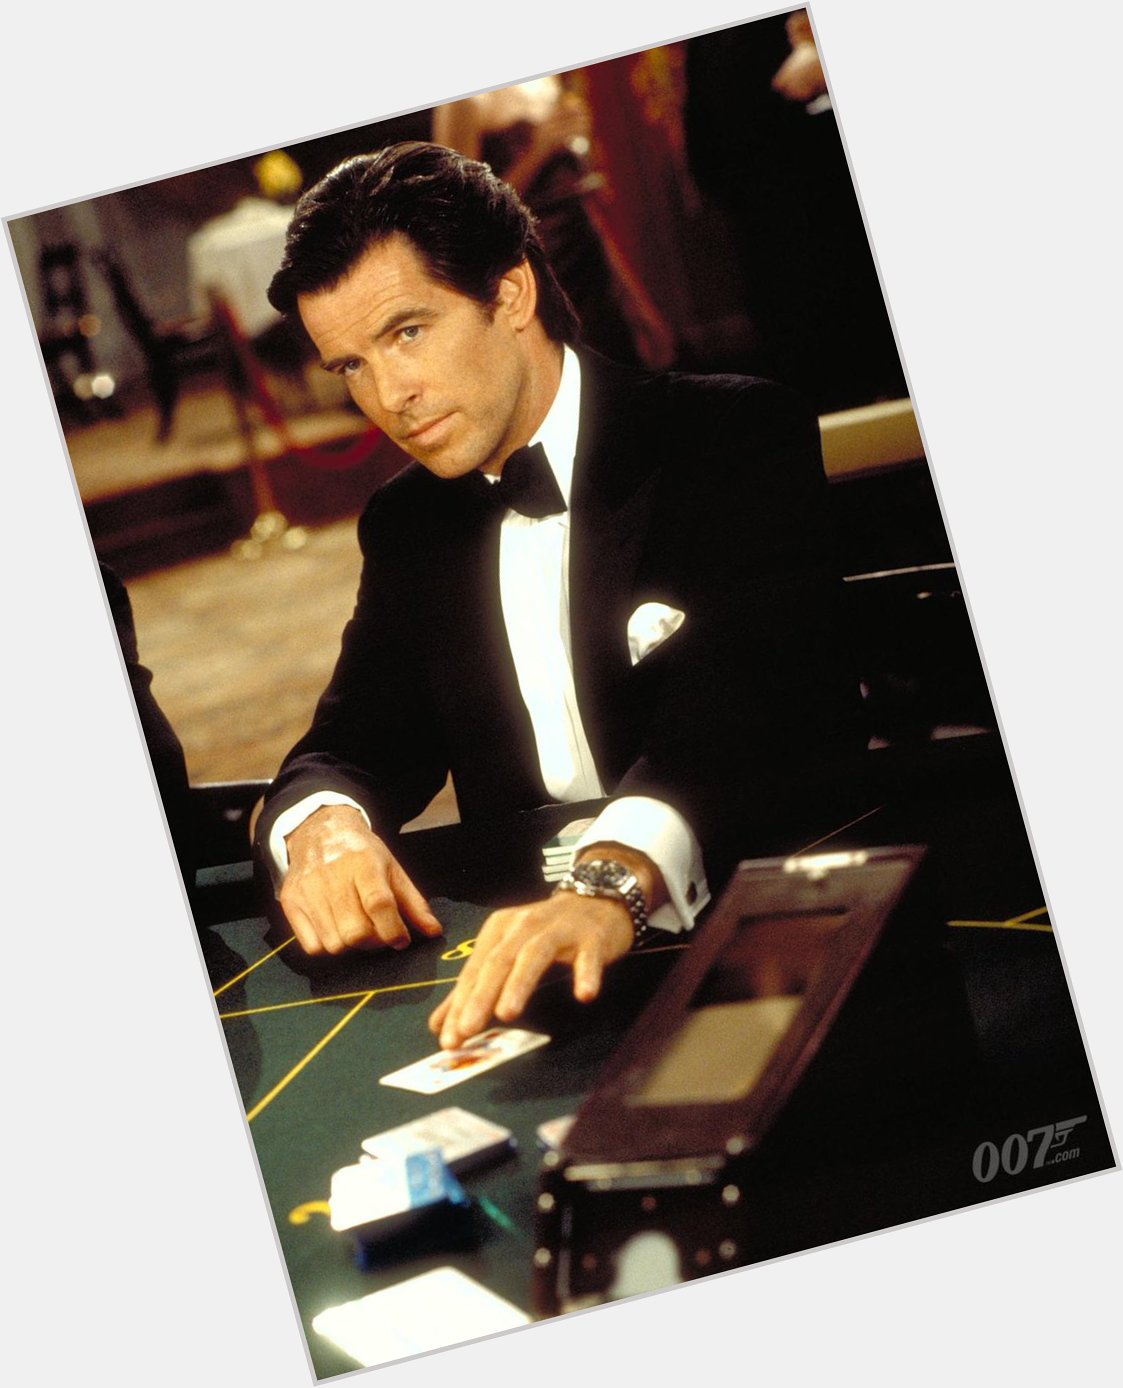 Here at KingsLane we would all like to wish a happy birthday to Mr Pierce Brosnan 007 himself. 